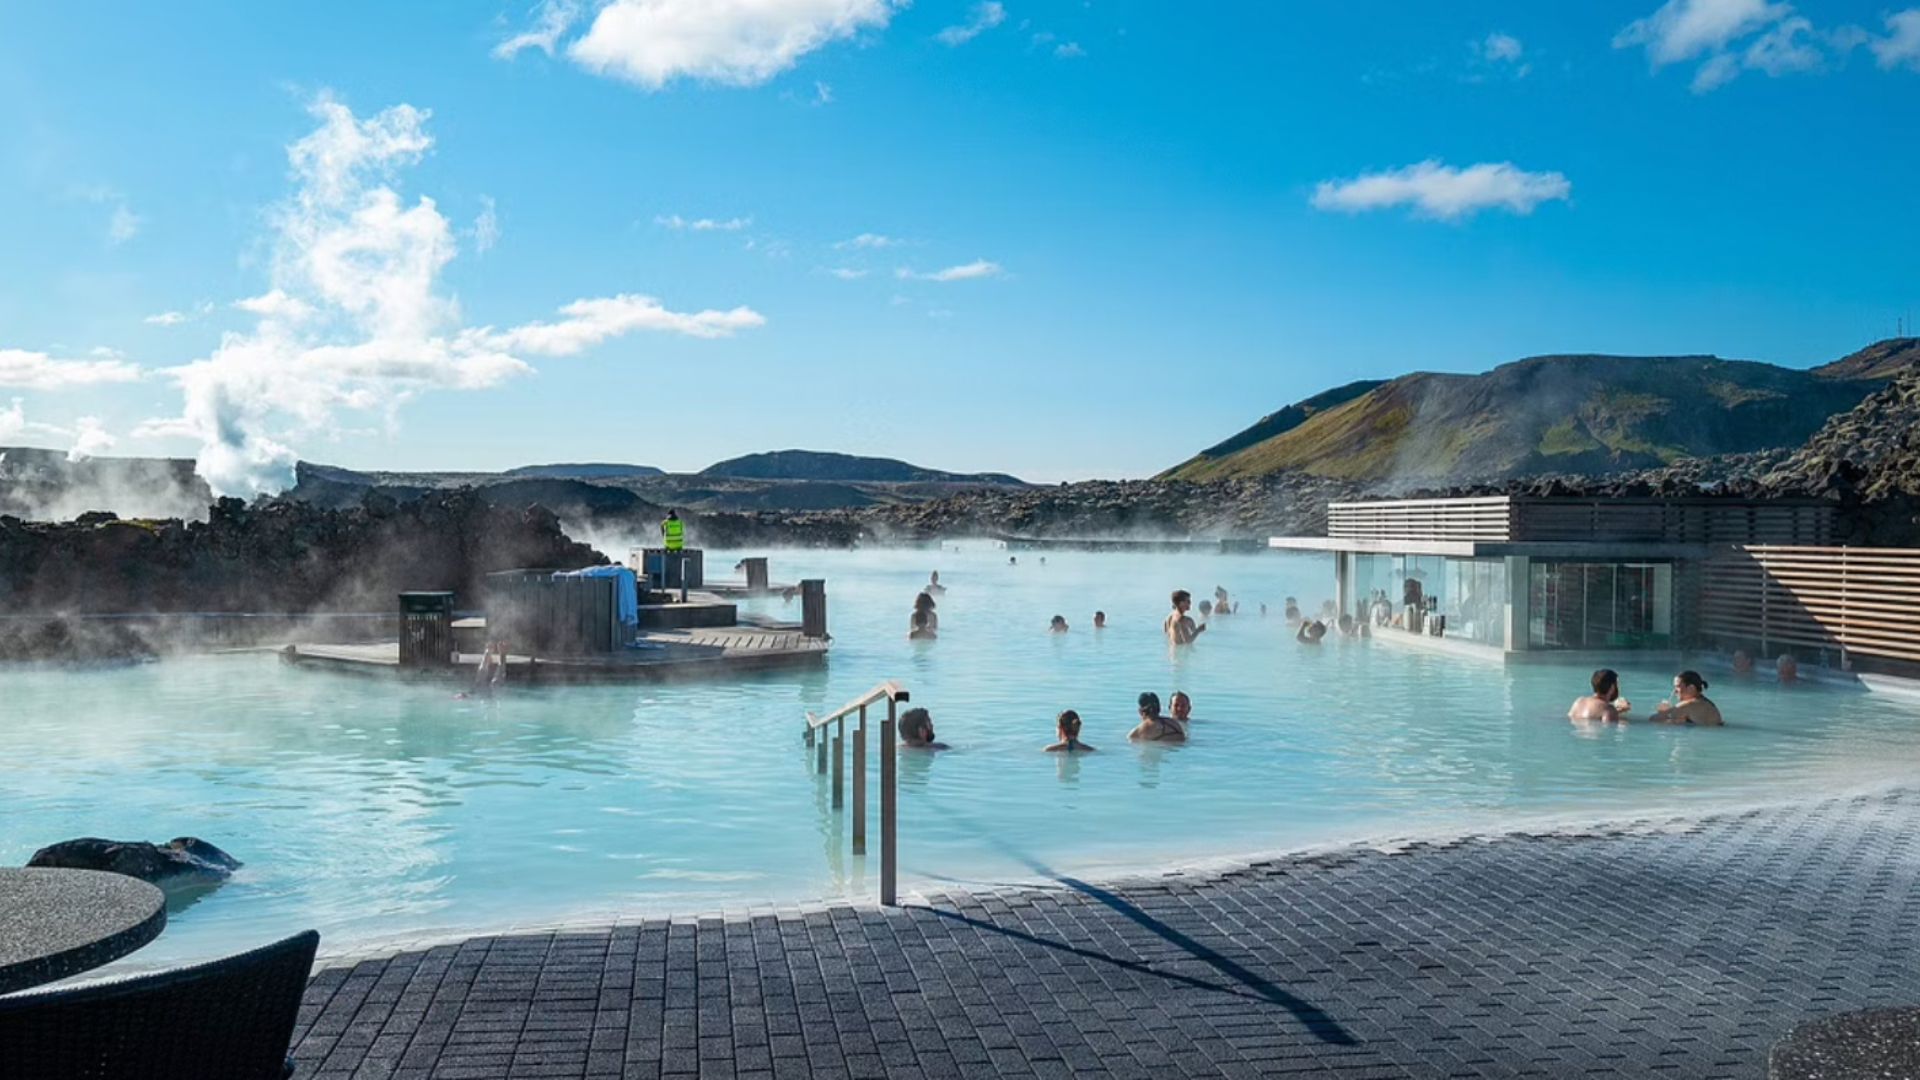 The Blue Lagoon Geothermal SPA in Iceland